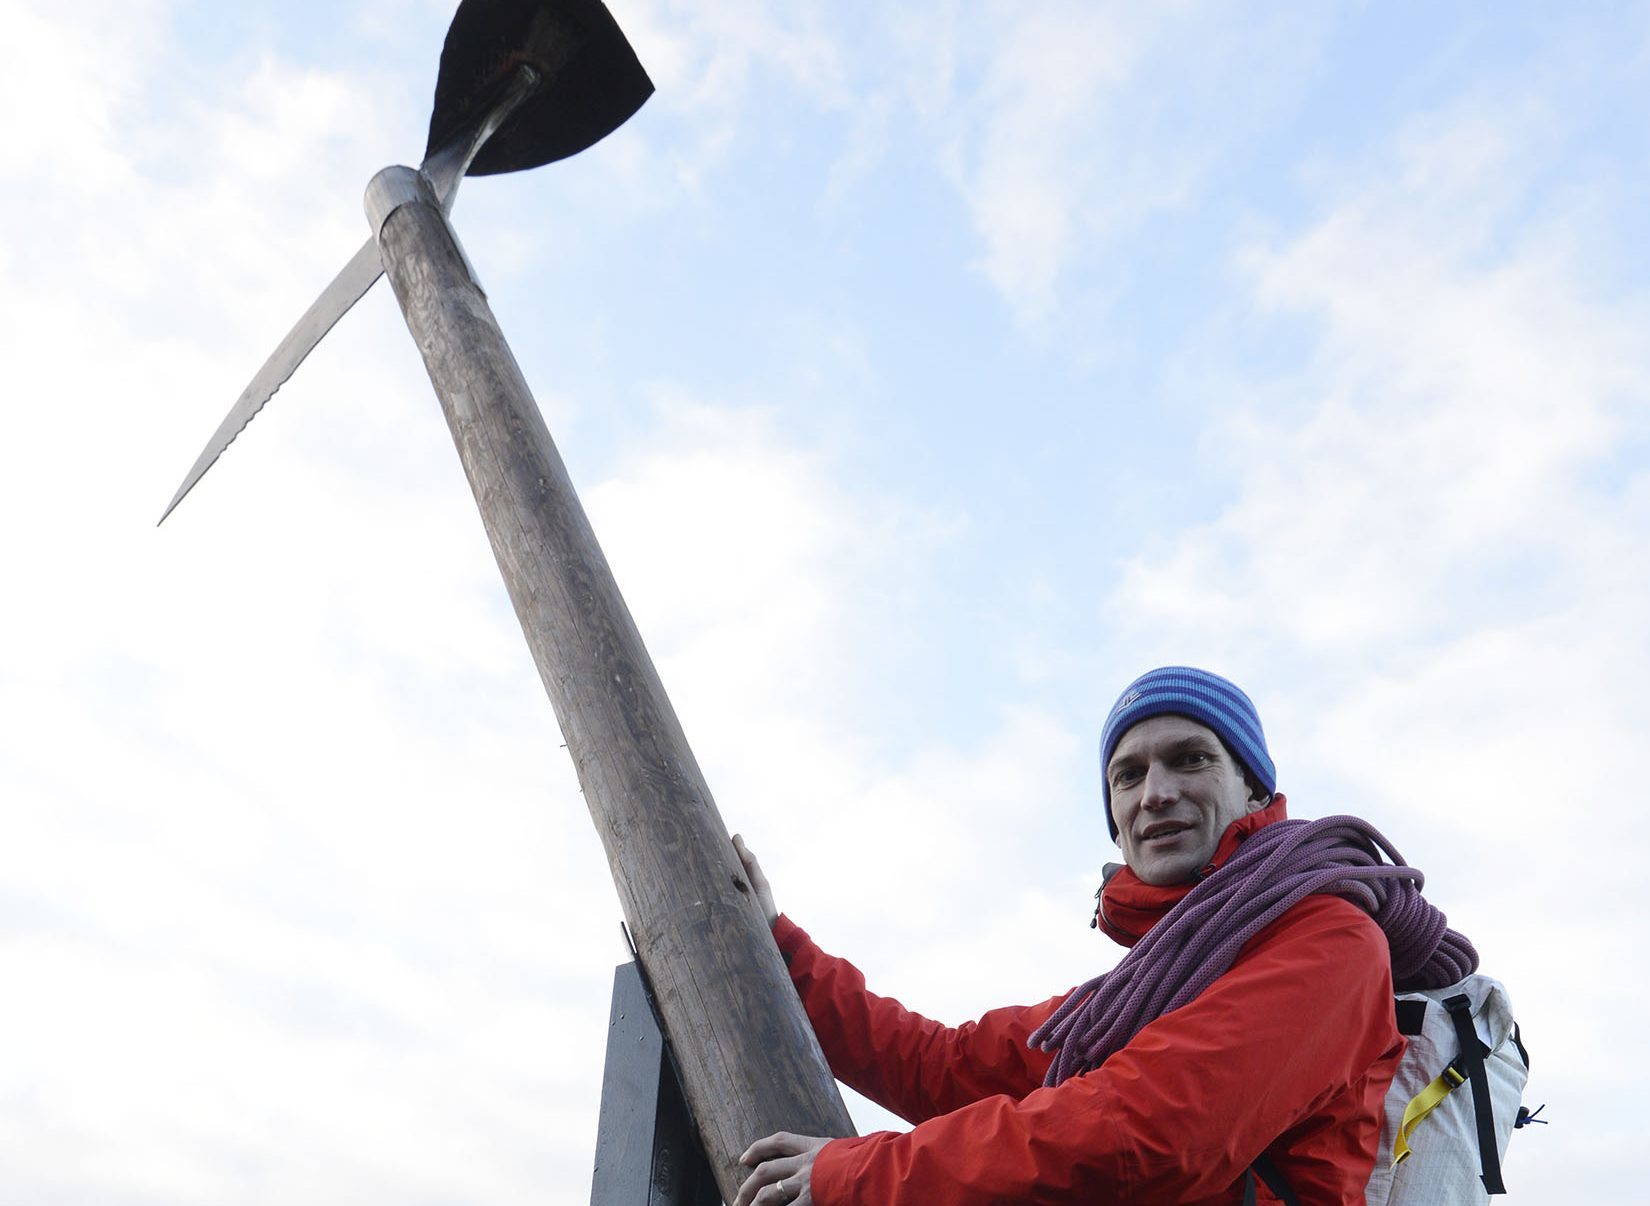 Chairman Mike Pescod wields the giant ice axe which promotes the event.